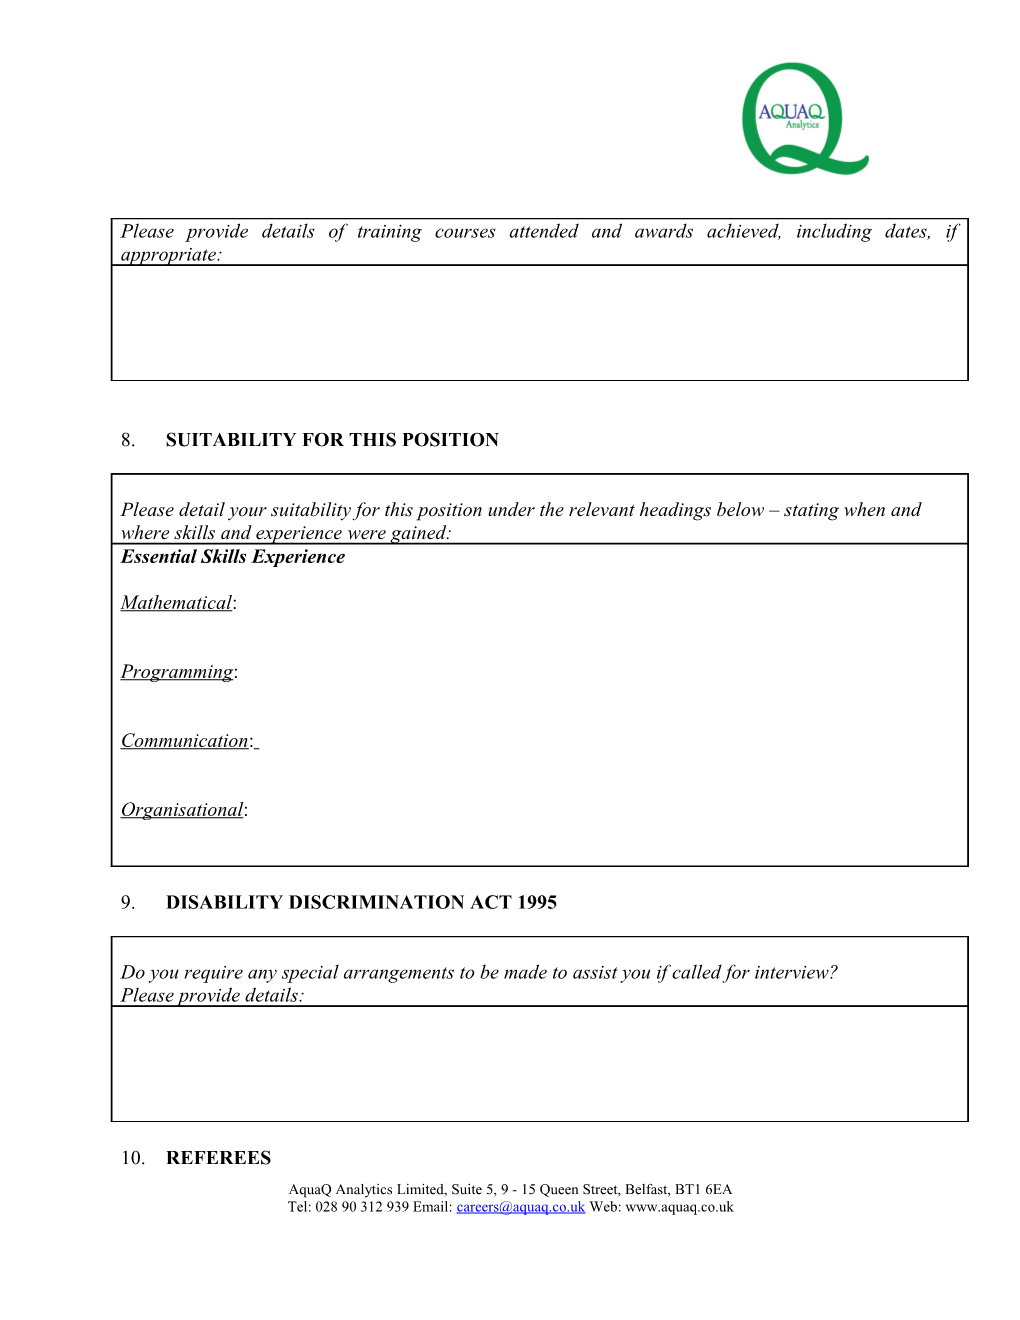 Please Complete This Form Legibly and Return It on Or Before the Closing Date Specified